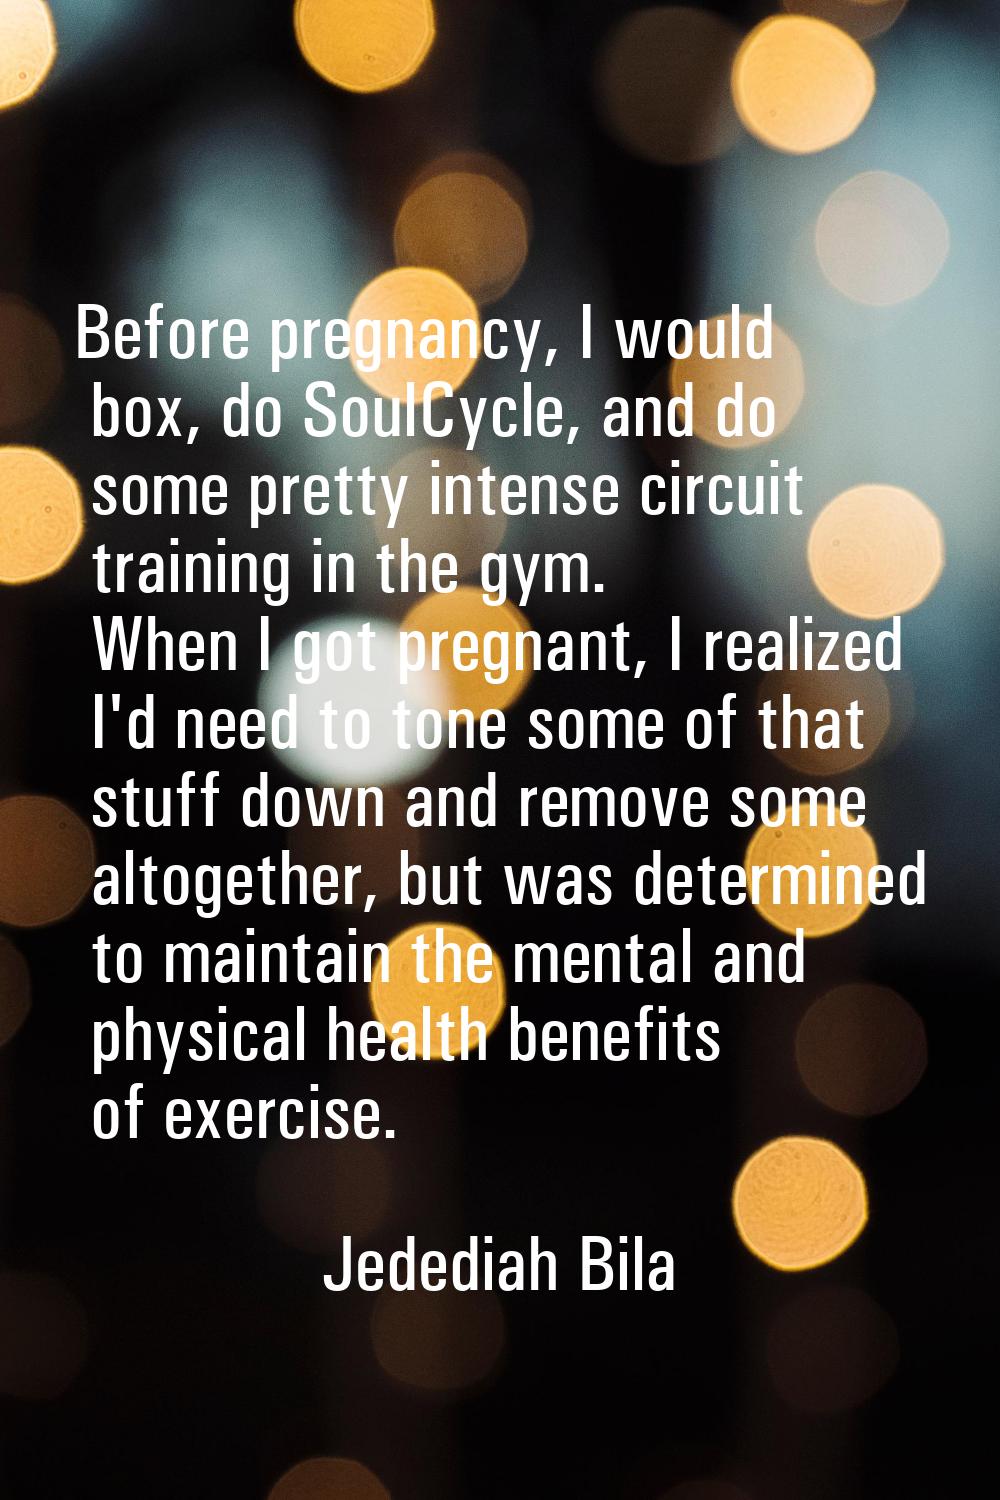 Before pregnancy, I would box, do SoulCycle, and do some pretty intense circuit training in the gym